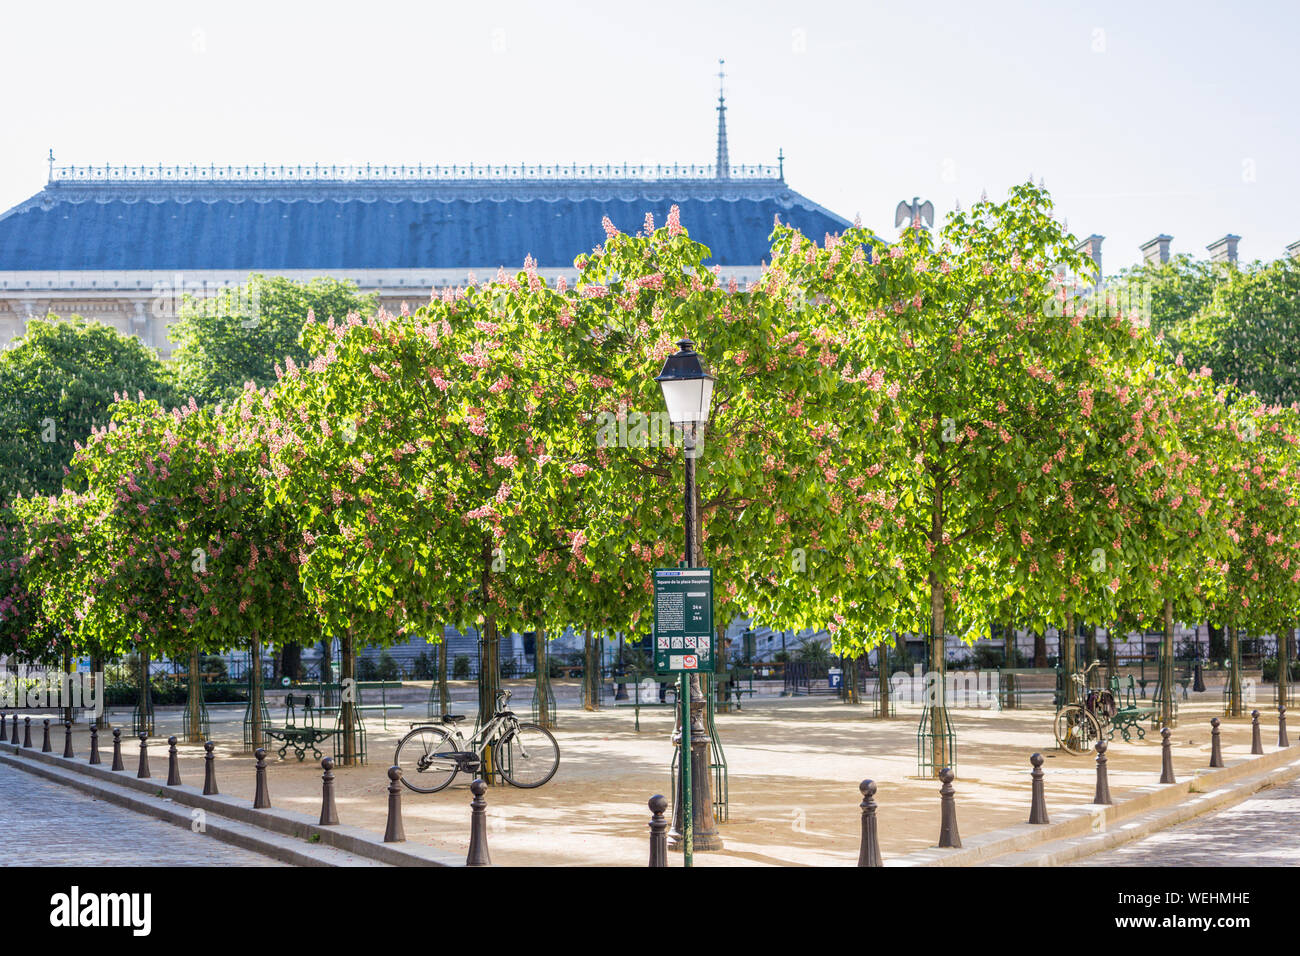 Chestnut trees in bloom in Place Dauphine, Paris, France Stock Photo